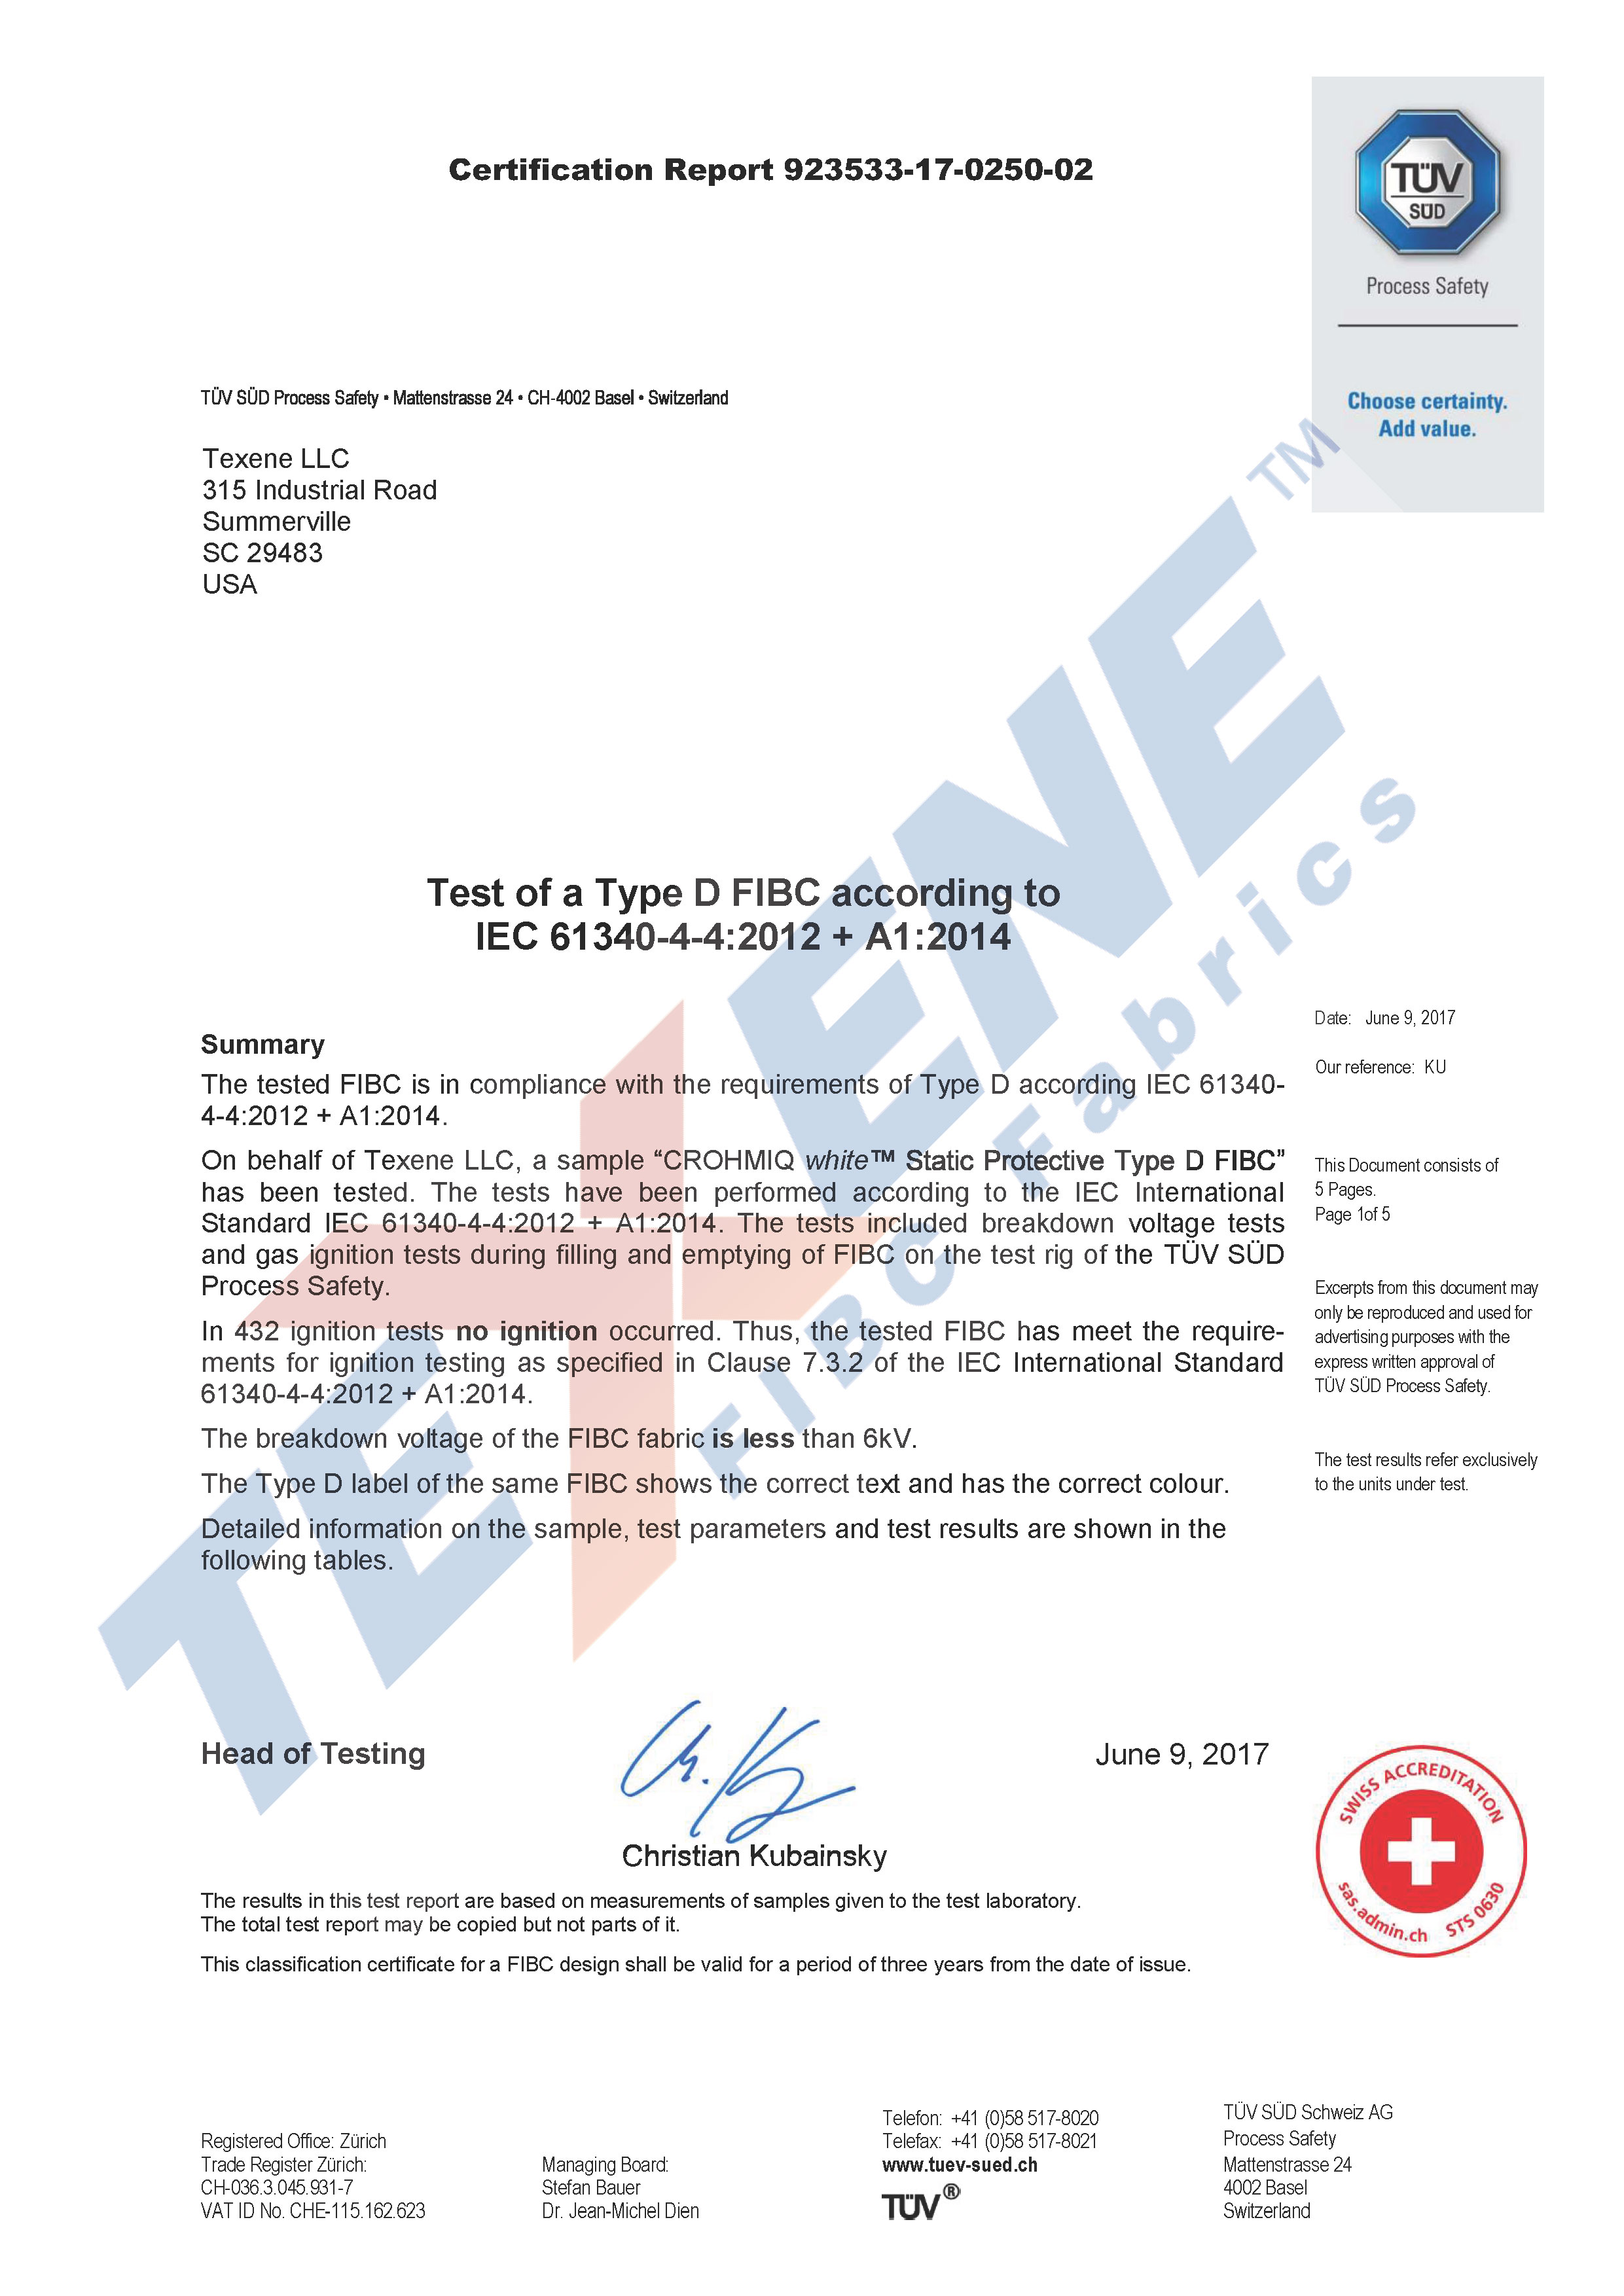 CROHMIQ Type D FIBC Electrostatic Ignition Test Reports from Chilworth & Swiss Institute